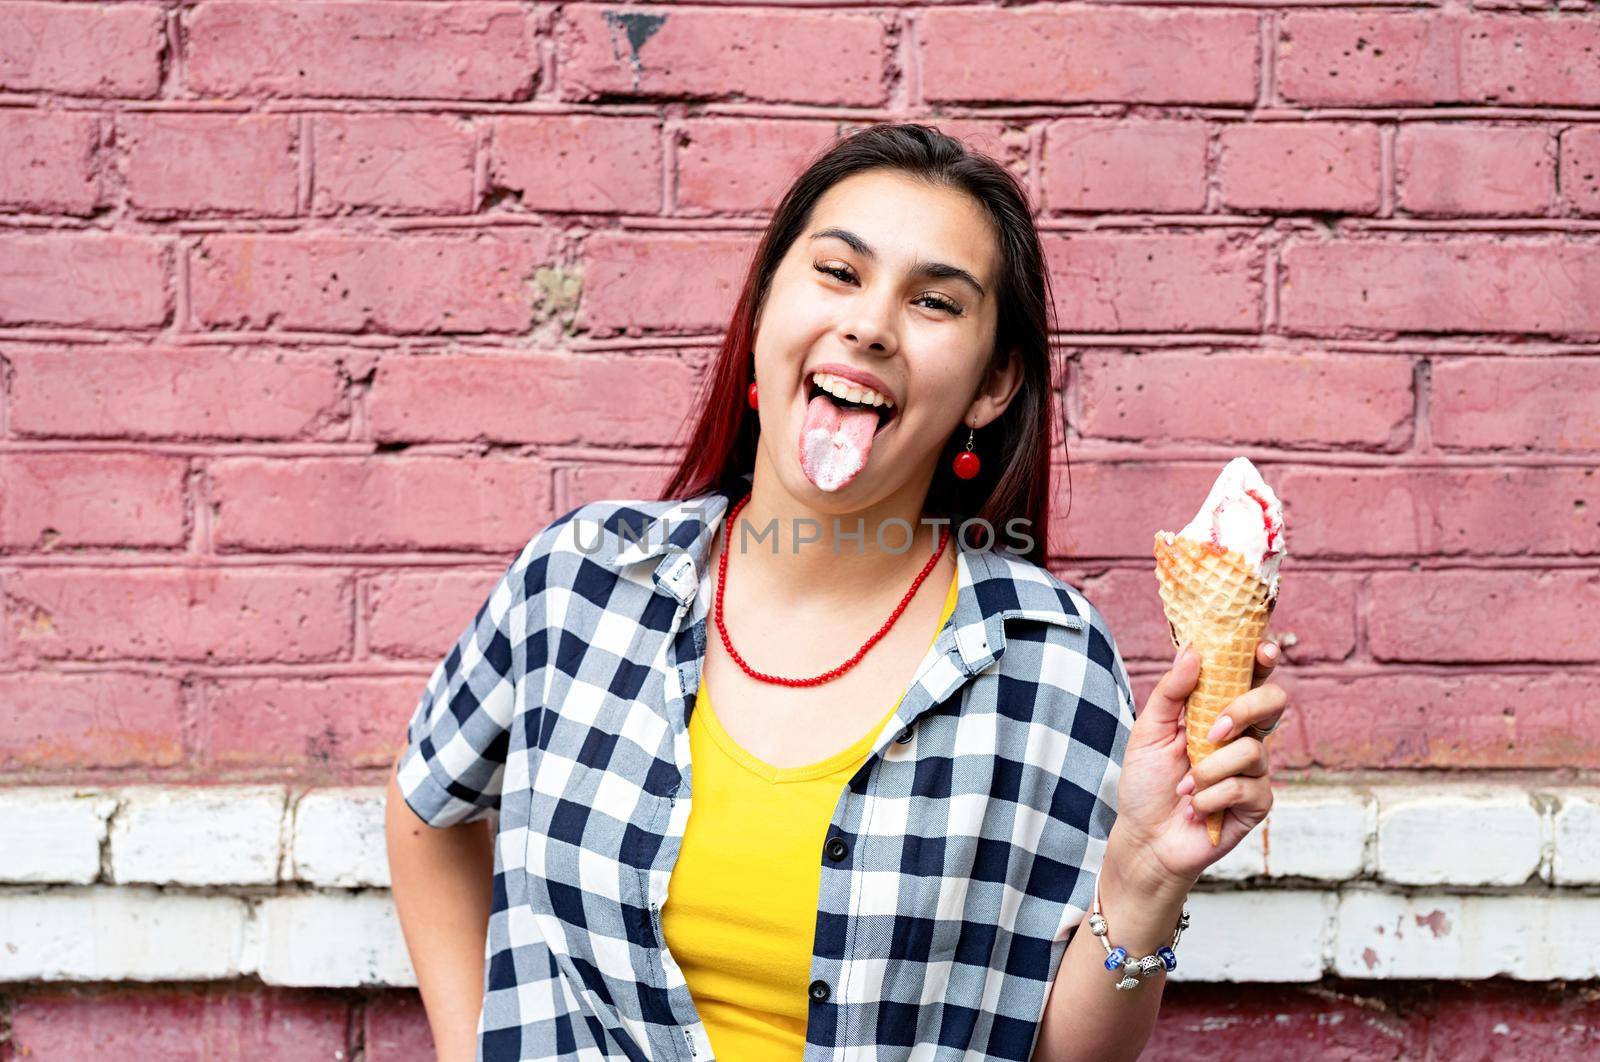 cheerful trendy woman with red hair eating ice cream on pink brick wall background at street by Desperada